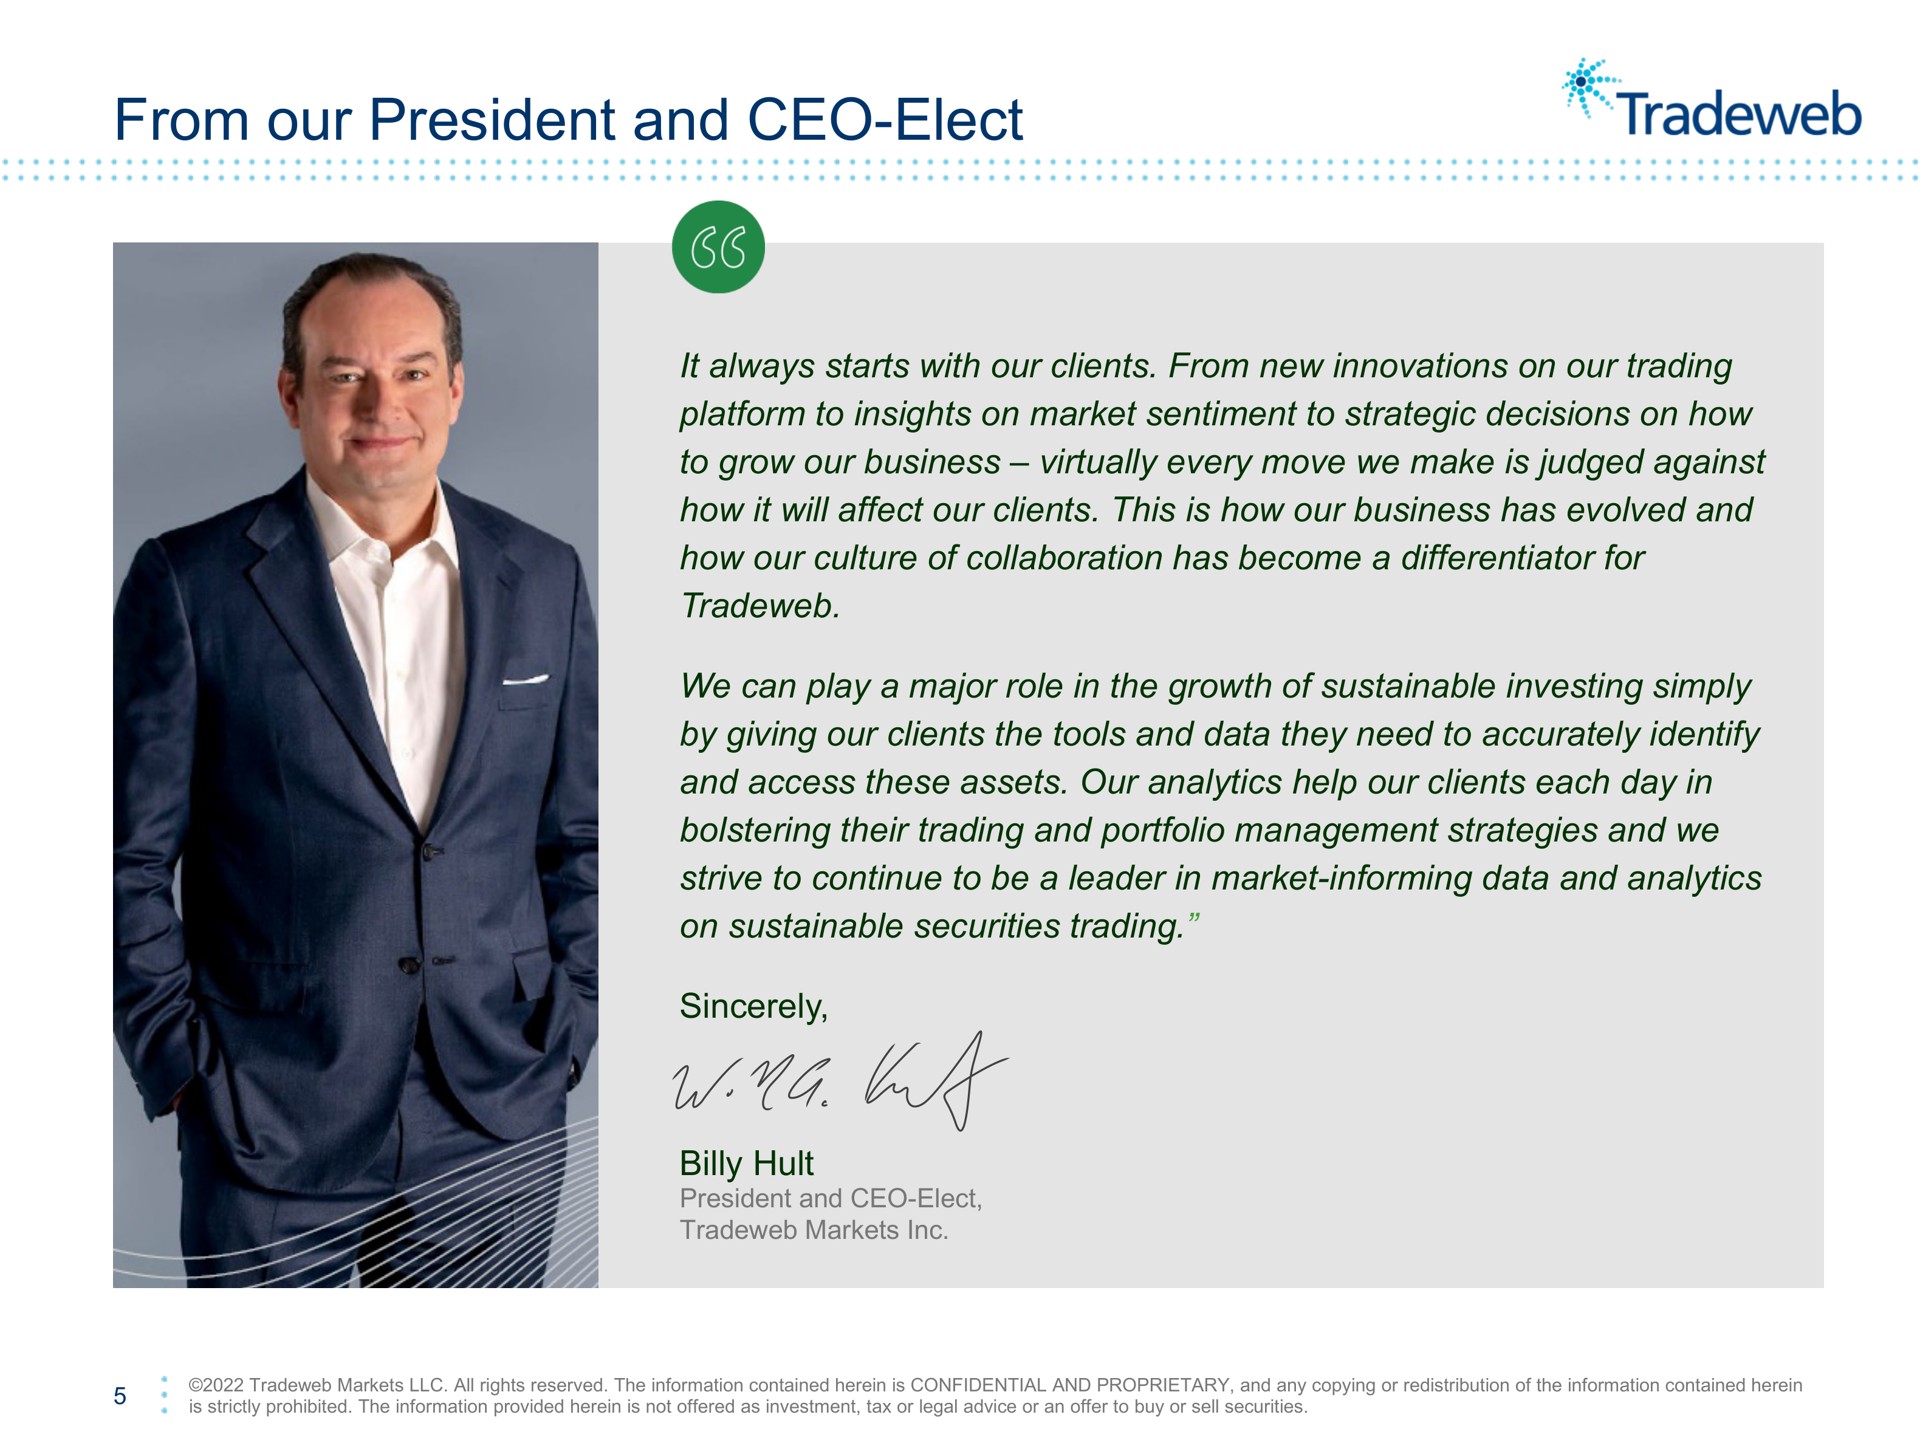 from our president and elect | Tradeweb